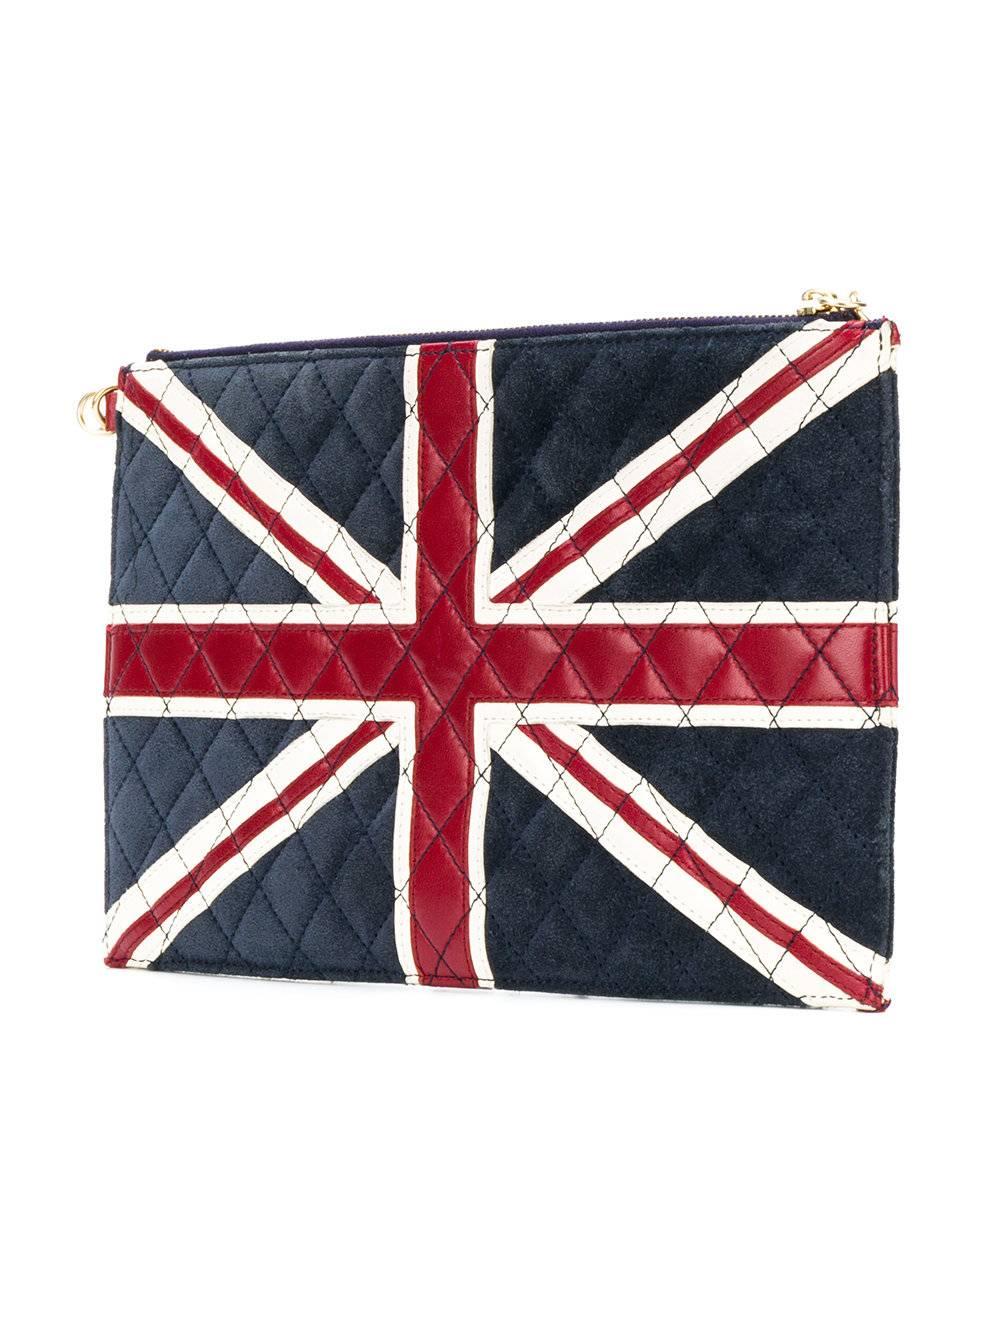 A vintage navy suede bag from Chanel Vintage featuring a Union Jack design, a signature logo to the front, a zip fastening, a chain strap and an interior pocket. 

Colour: Navy, red

Material: Suede

Measurements: W: 26cm, H: 17cm, handle drop: